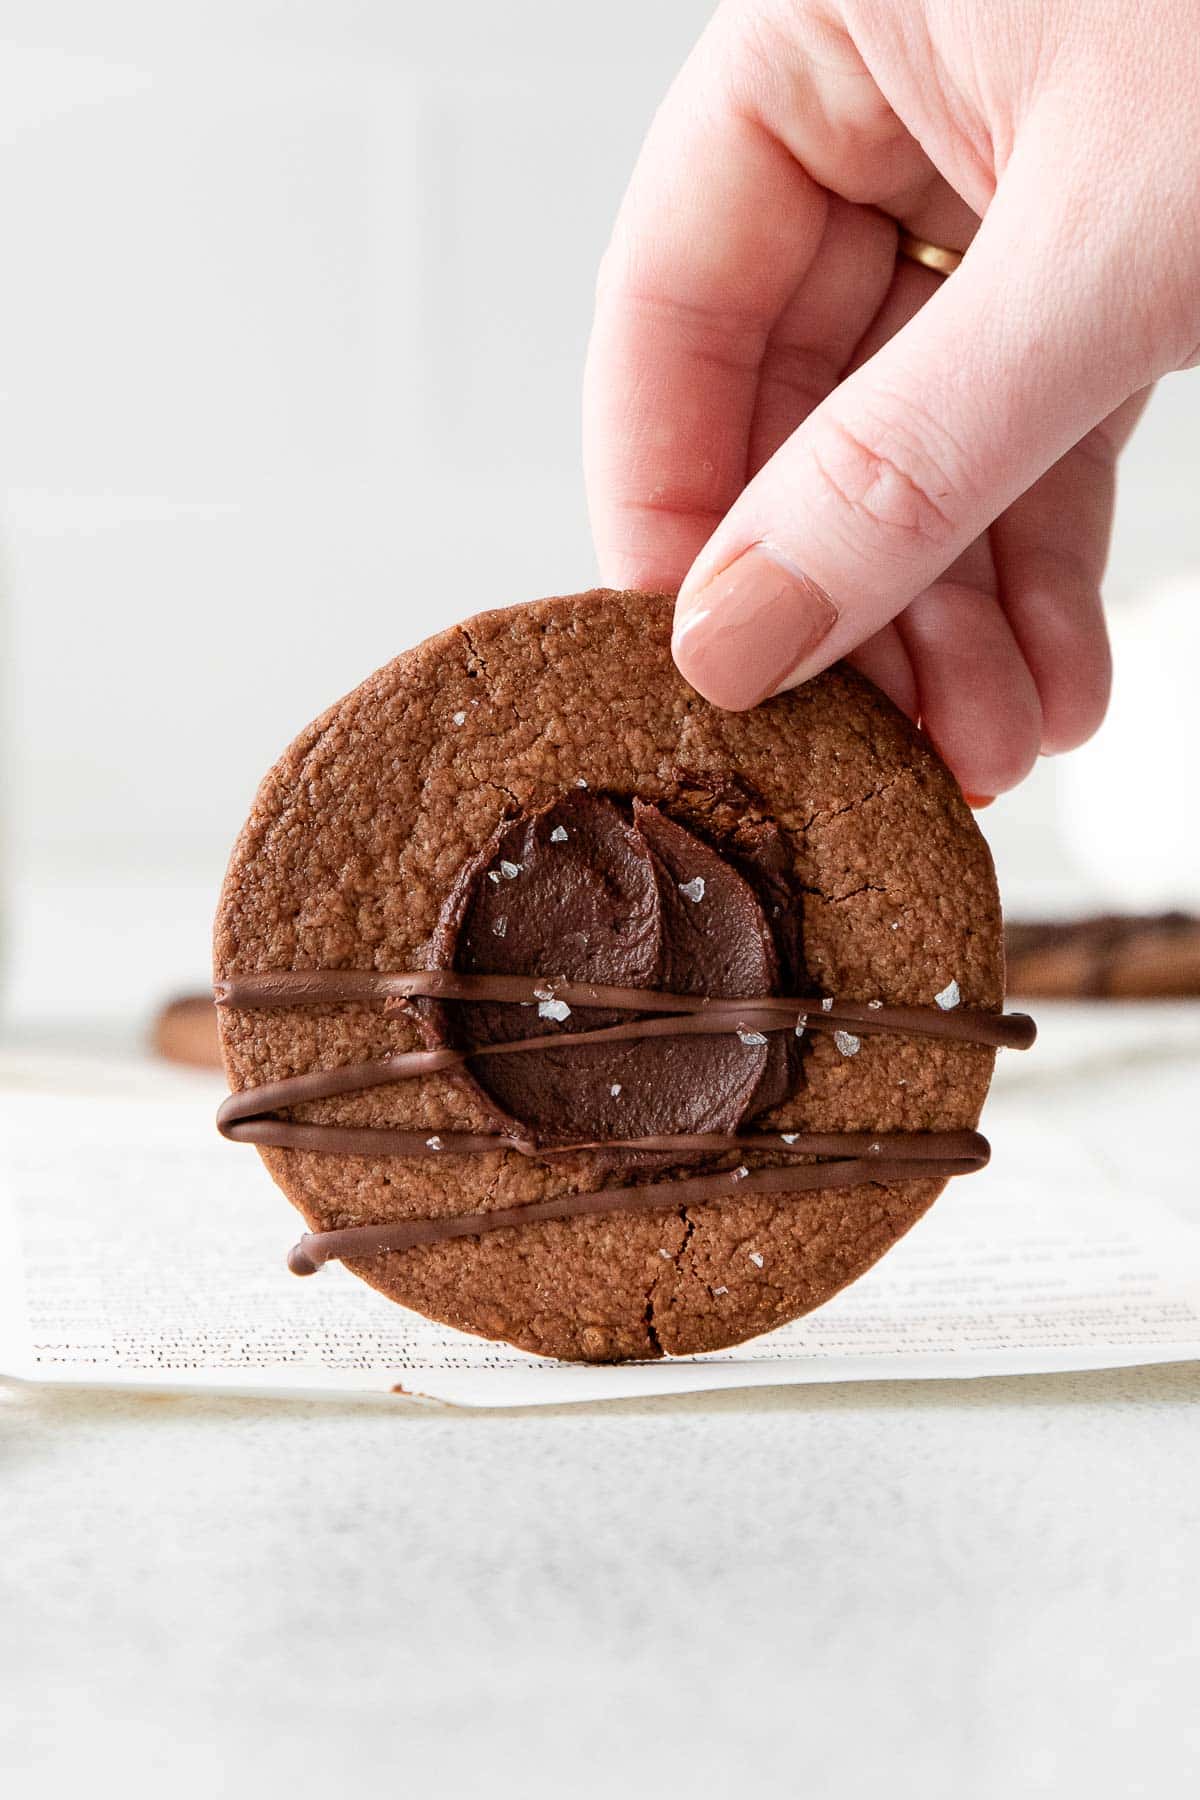 woman's hand holding a chocolate cookie with chocolate genache center.